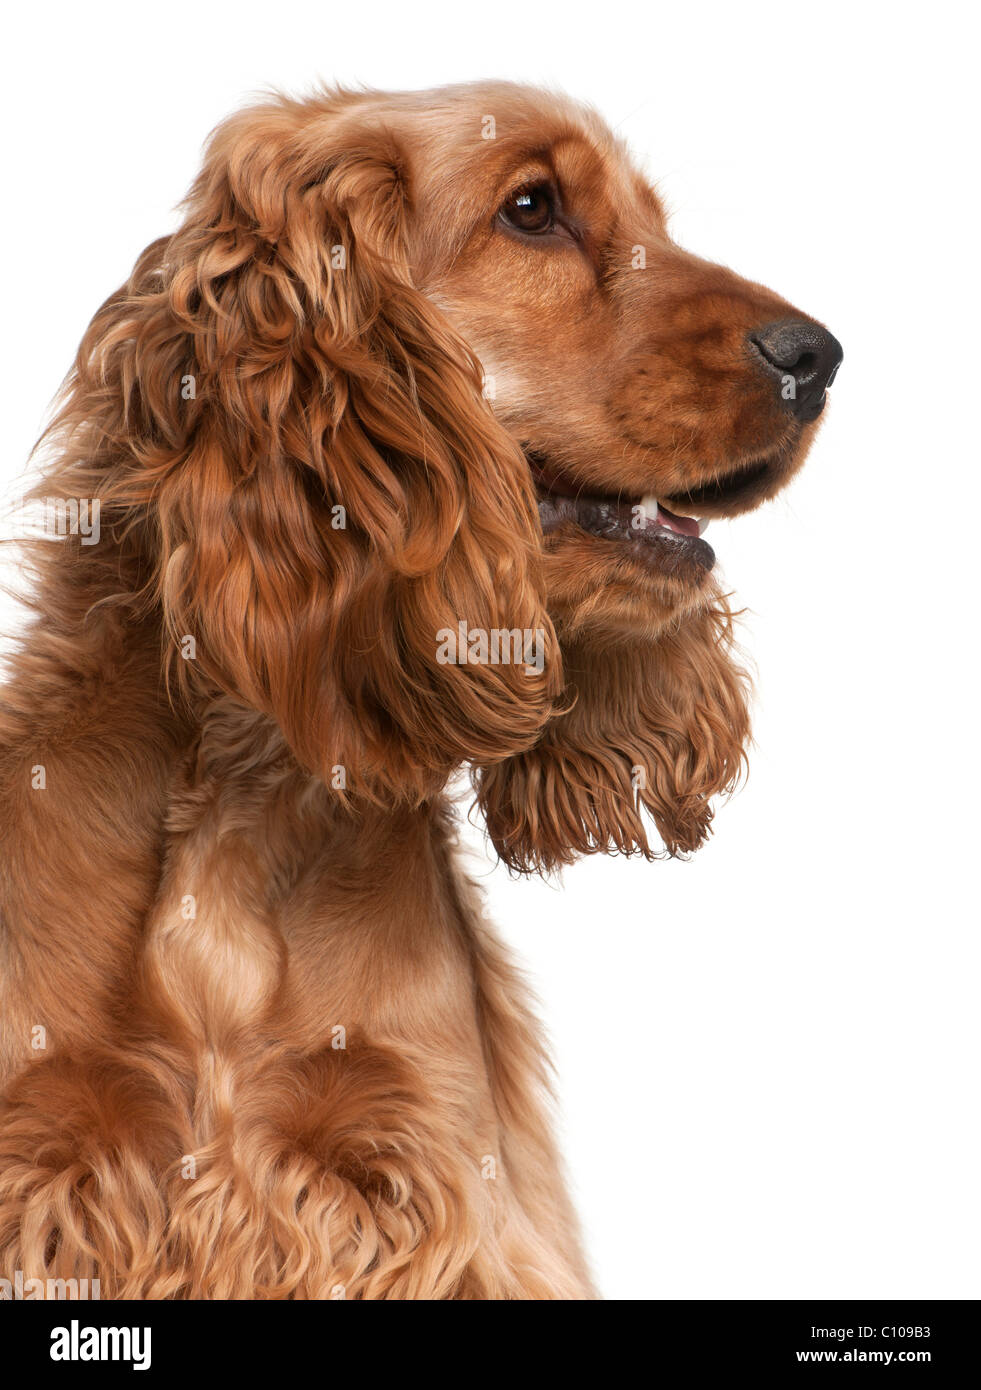 English Cocker Spaniel, 2 years old, in front of white background Stock Photo